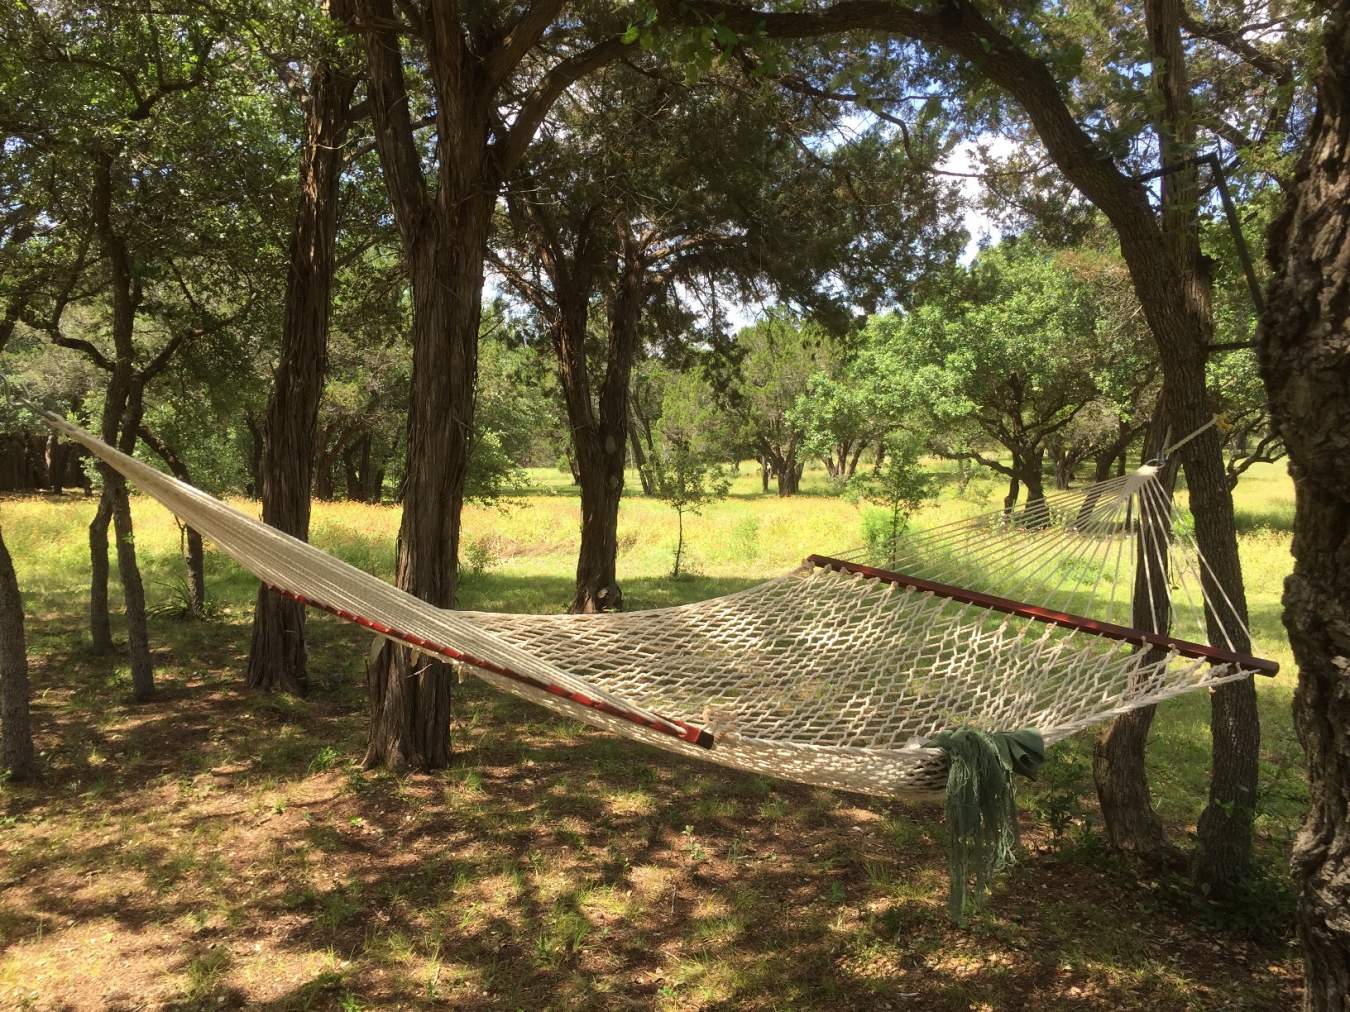 A comfortable hammock hangs among the shade trees waiting for a guest to nap or read a book.